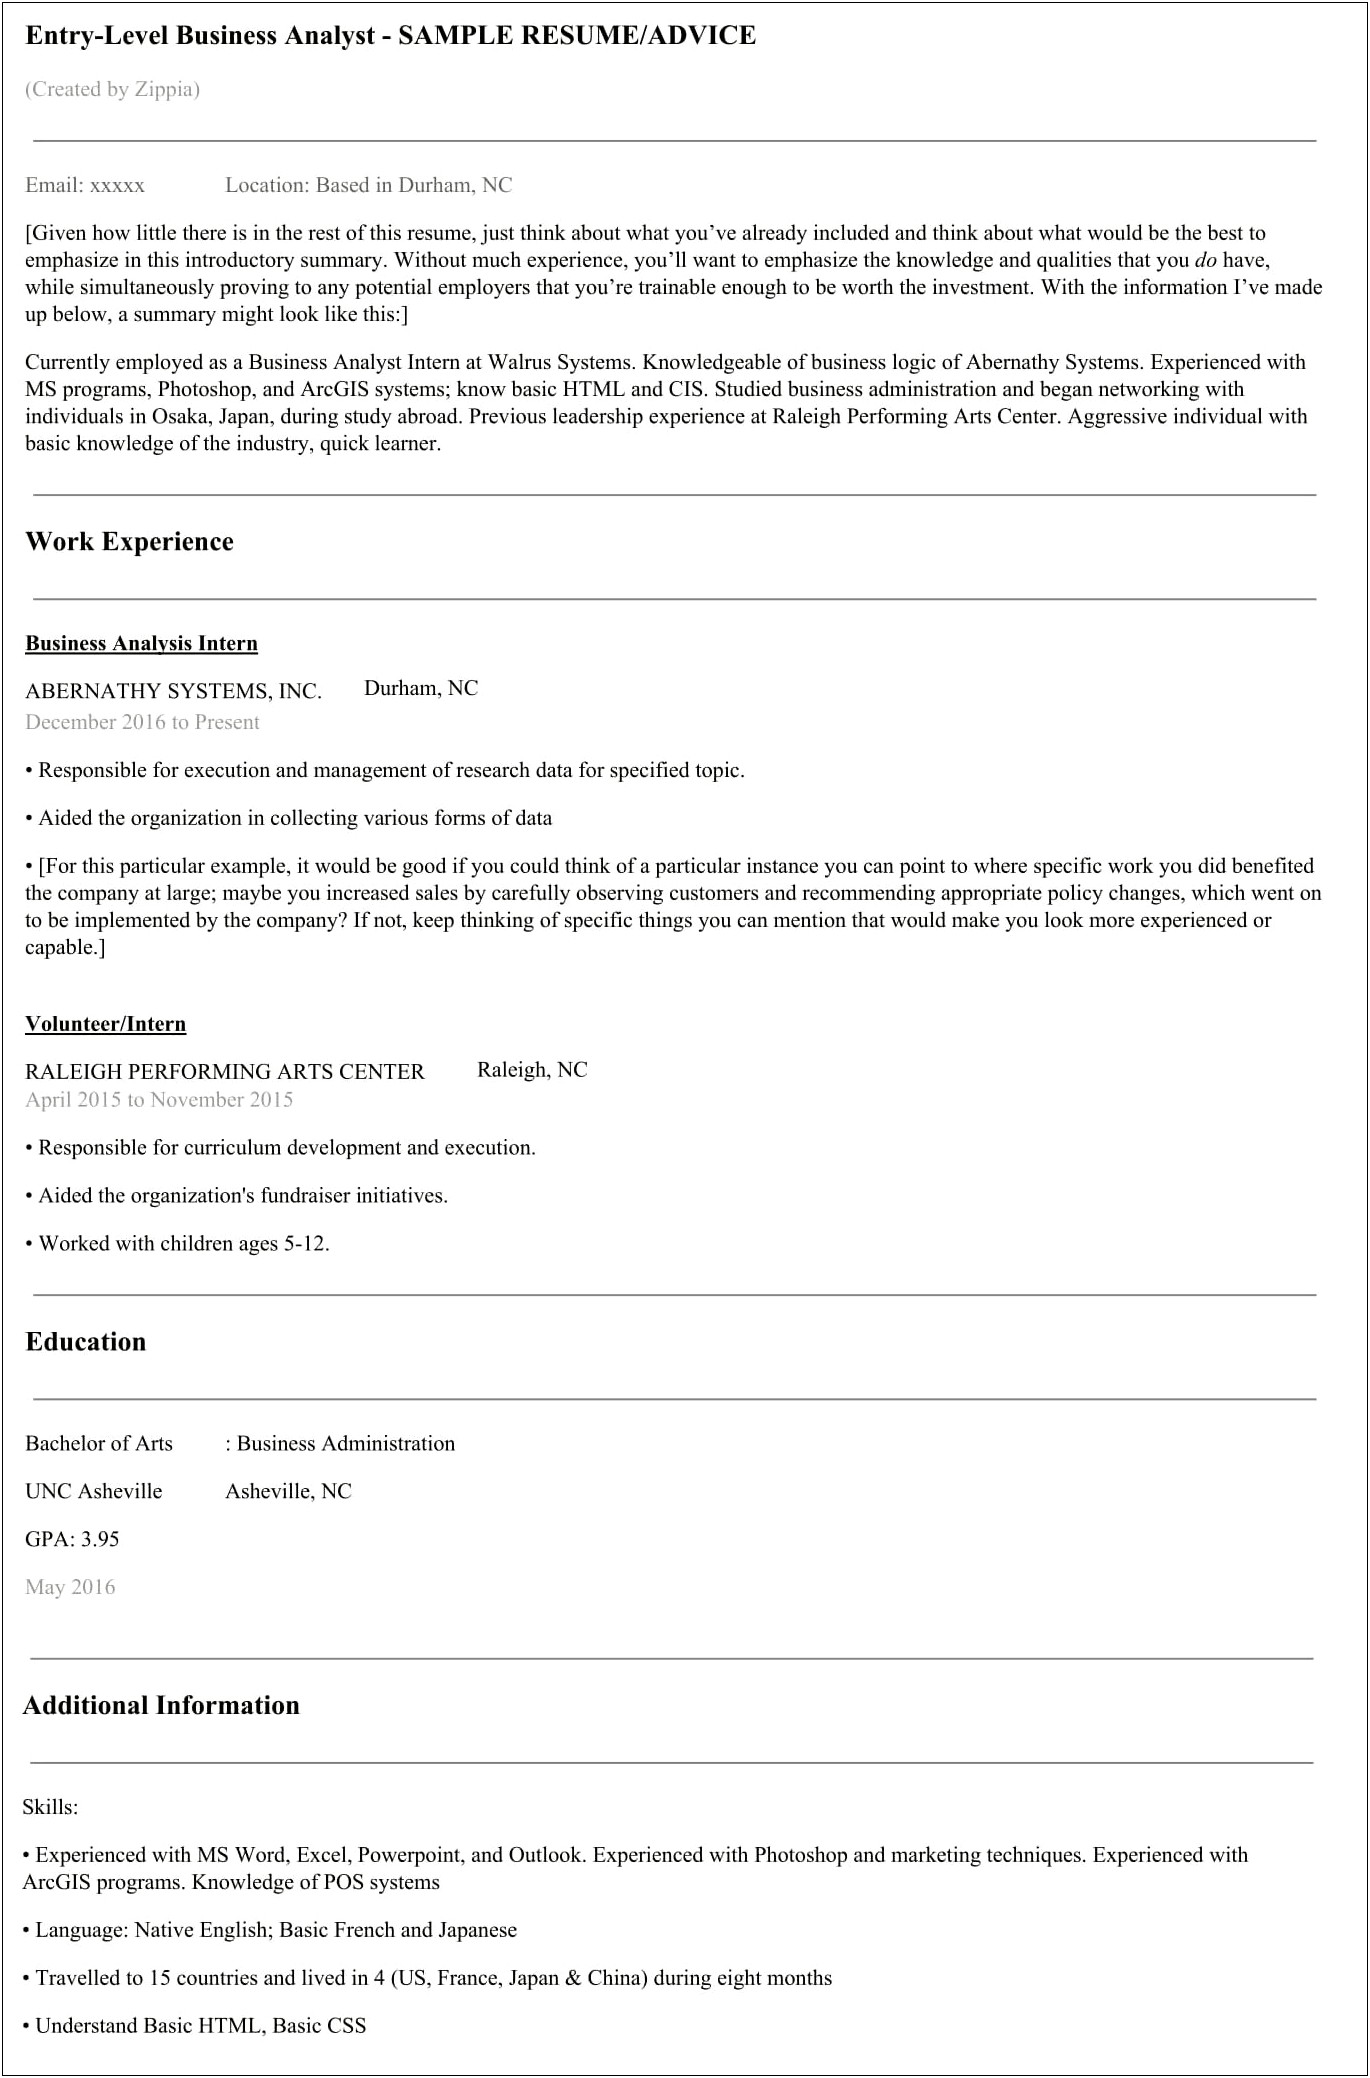 Should I Put Specific Examples In Resume